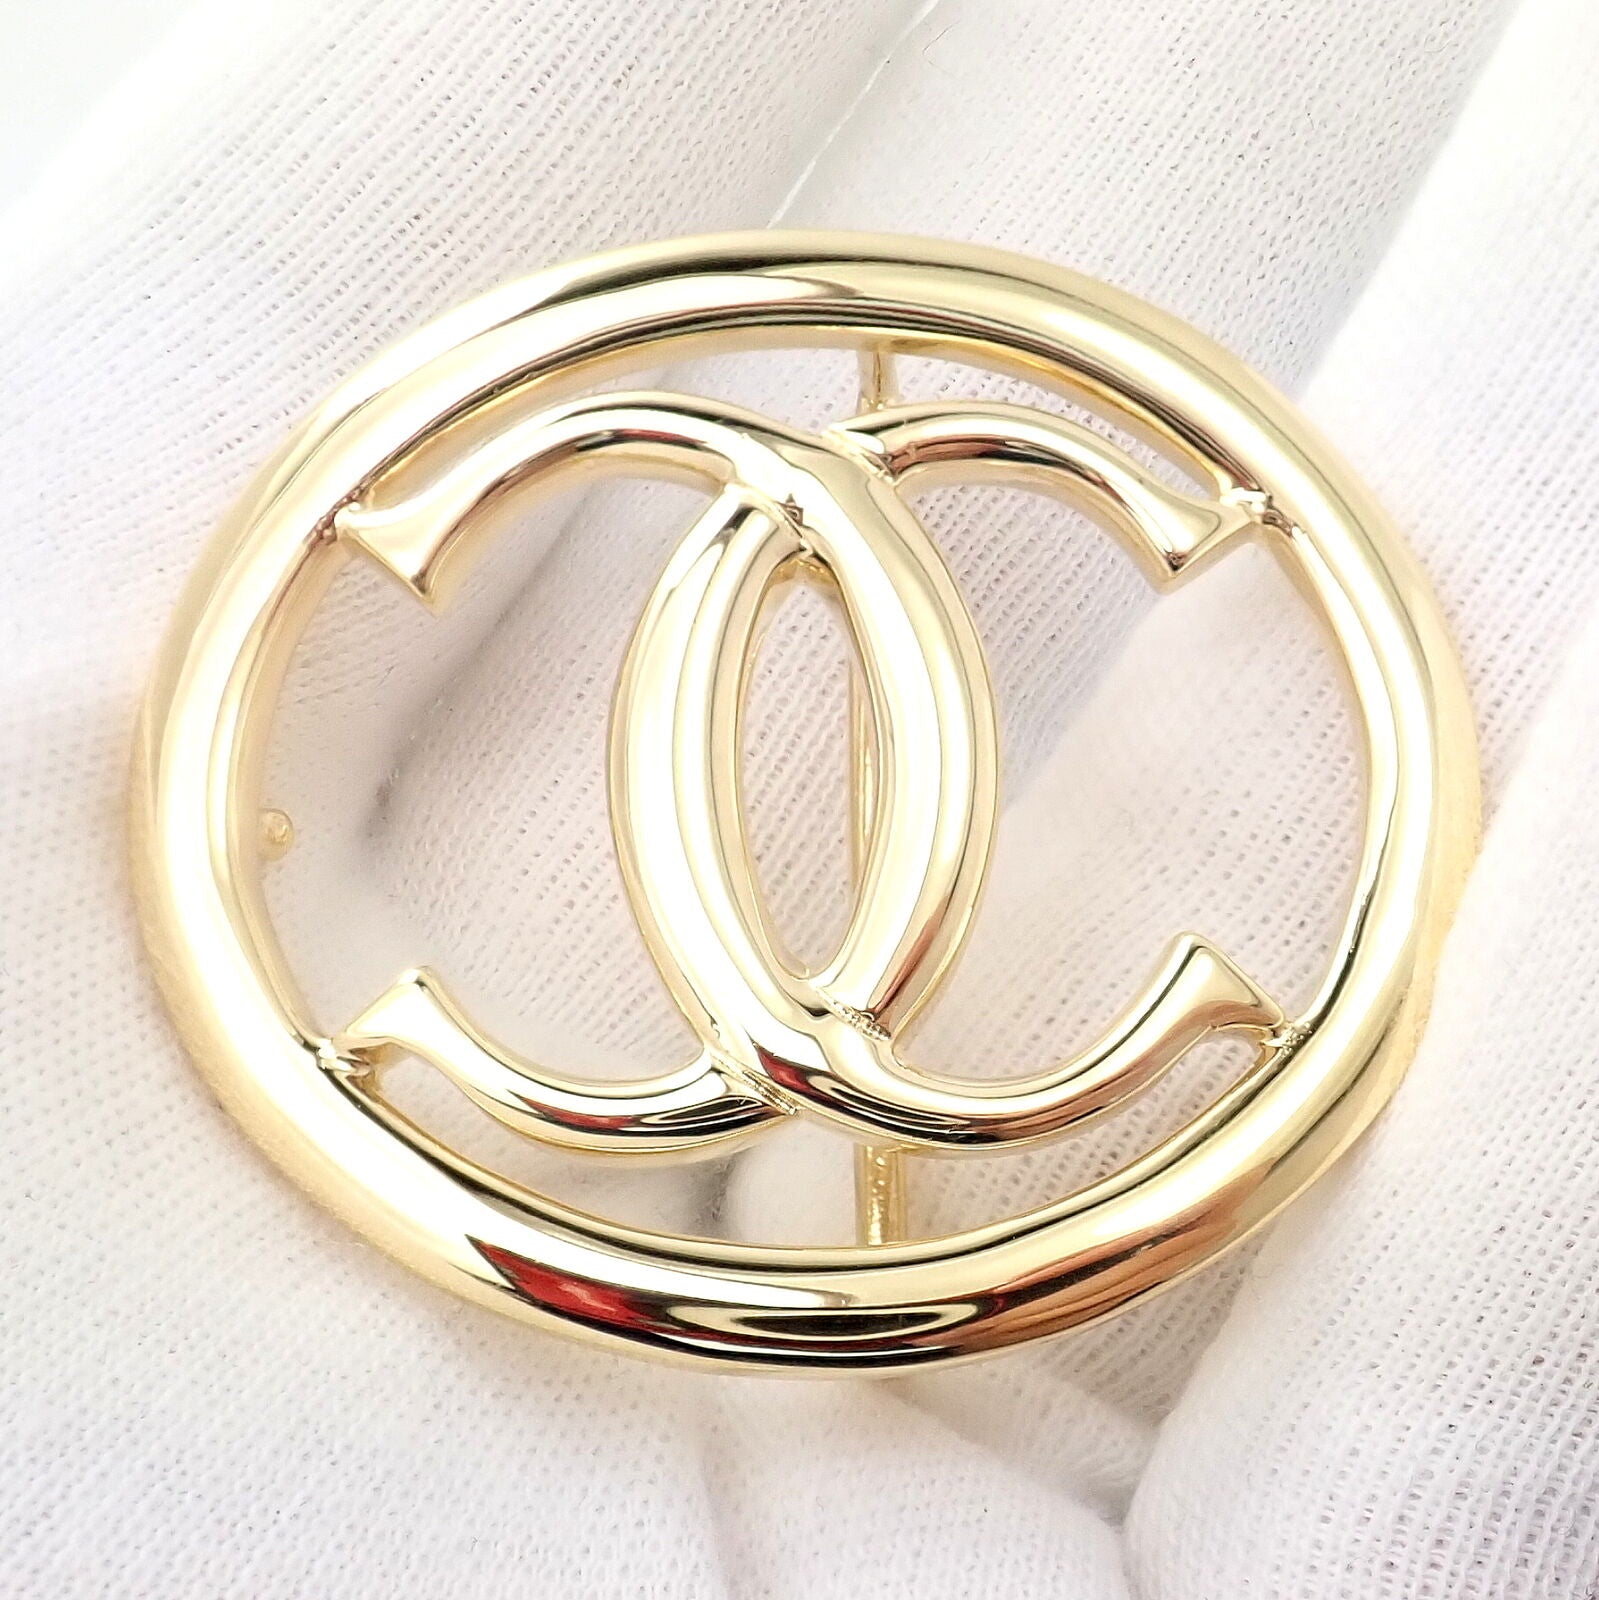 Authentic Vintage Chanel key chain ring CC logo double C silver